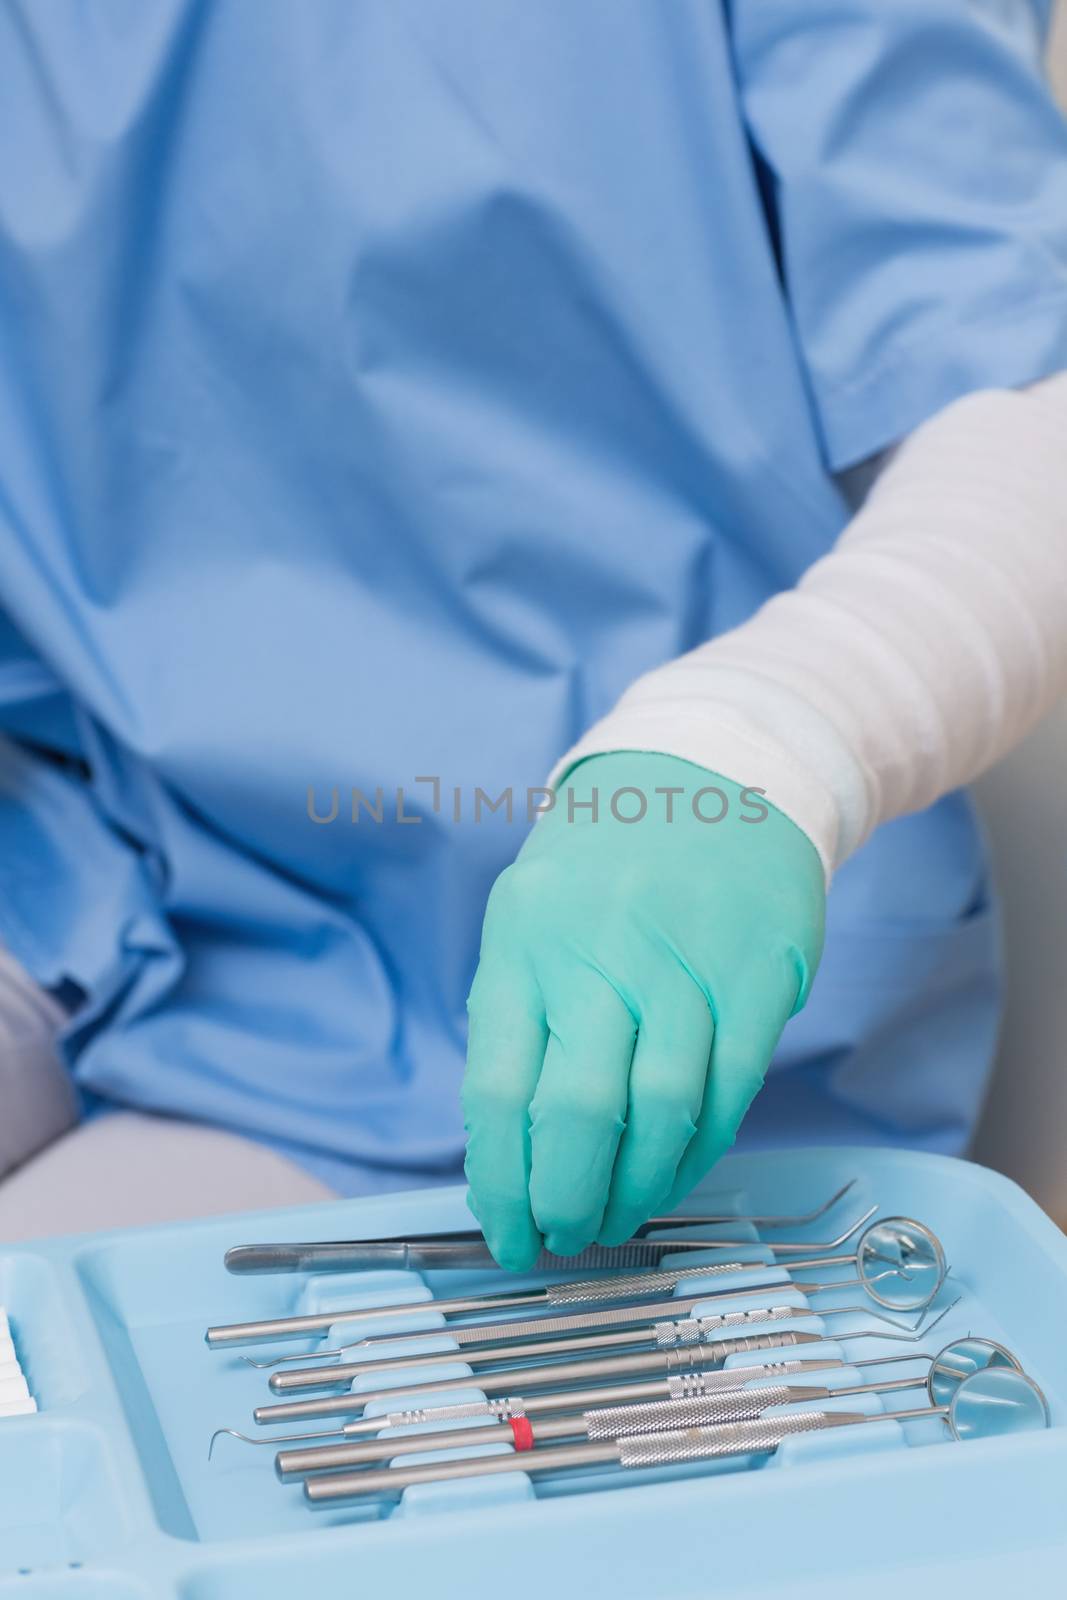 Dentist in blue scrubs picking up tools at the dental clinic